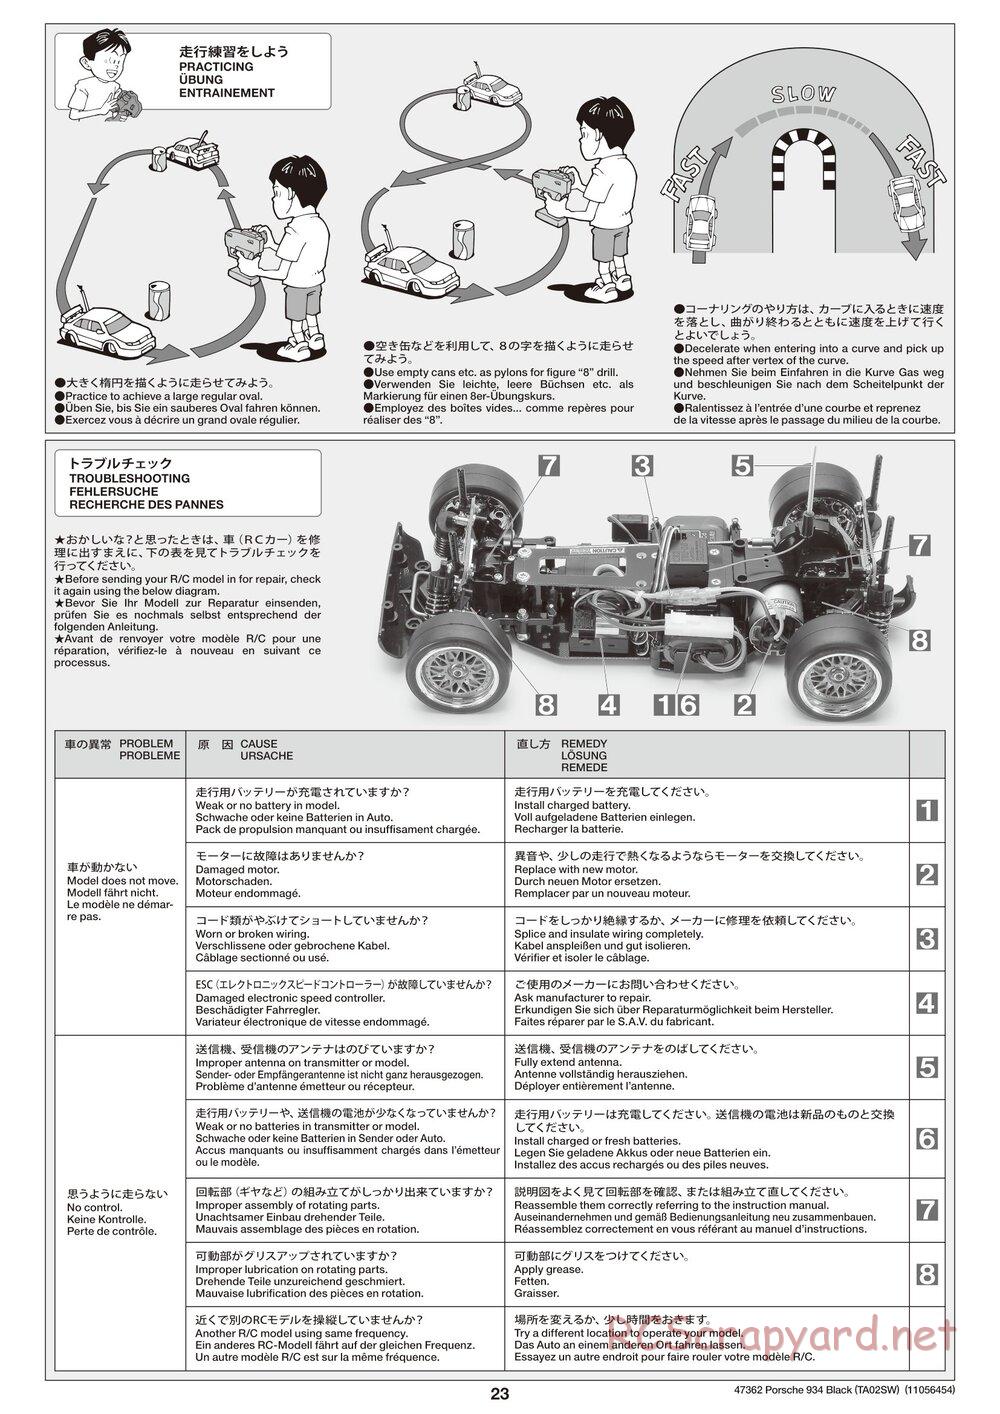 Tamiya - TT-02 White Special Chassis - Manual - Page 23